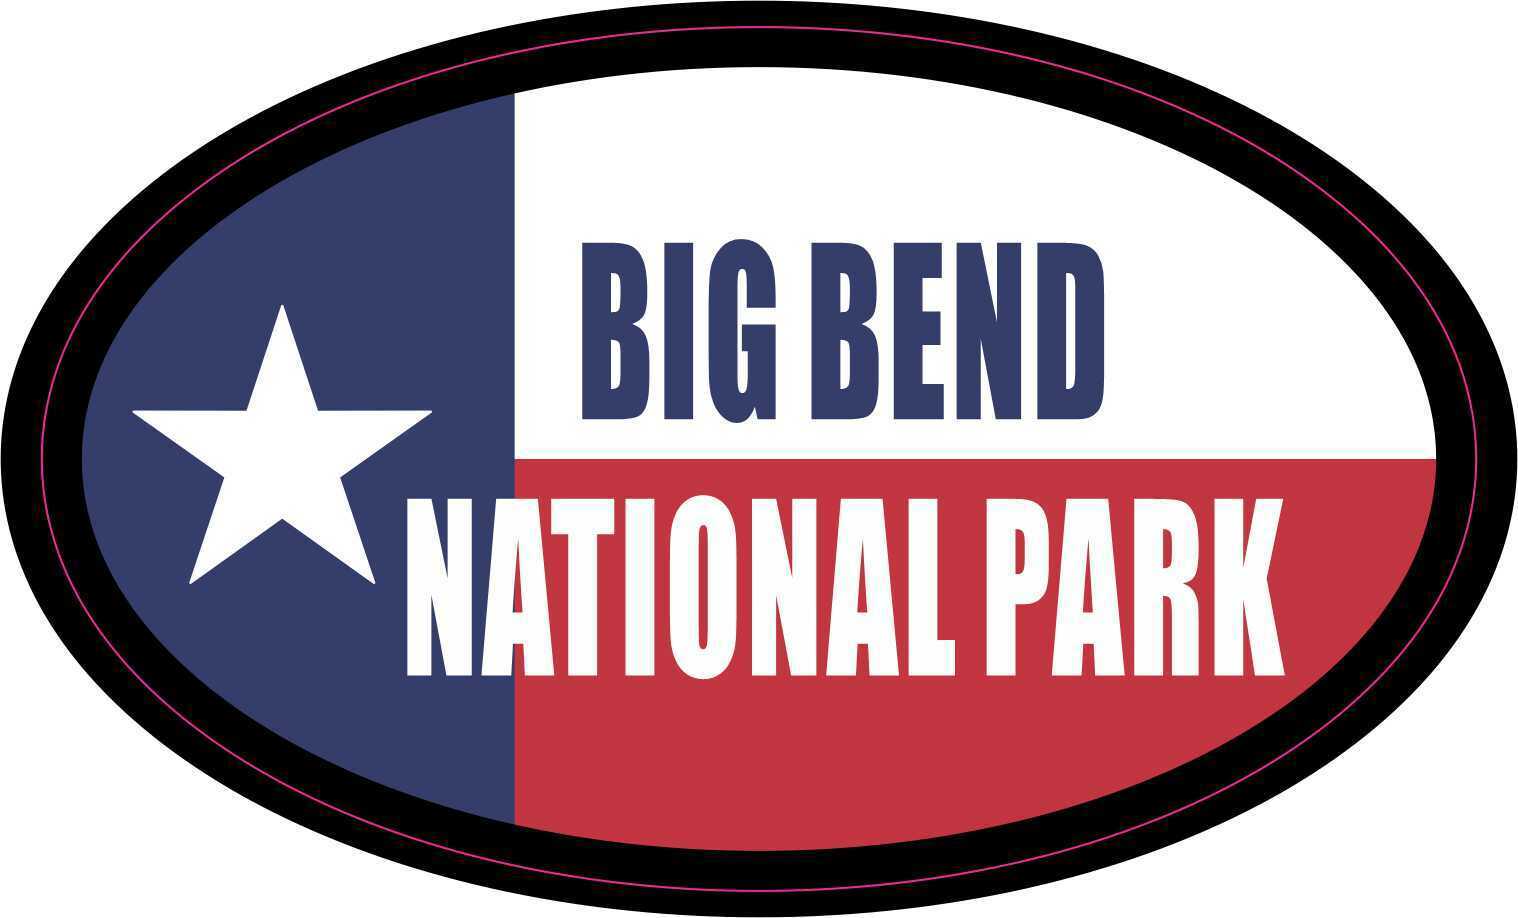 4.75in x 3in Oval Big Bend National Park Vinyl Sticker Car Vehicle Bumper Decal